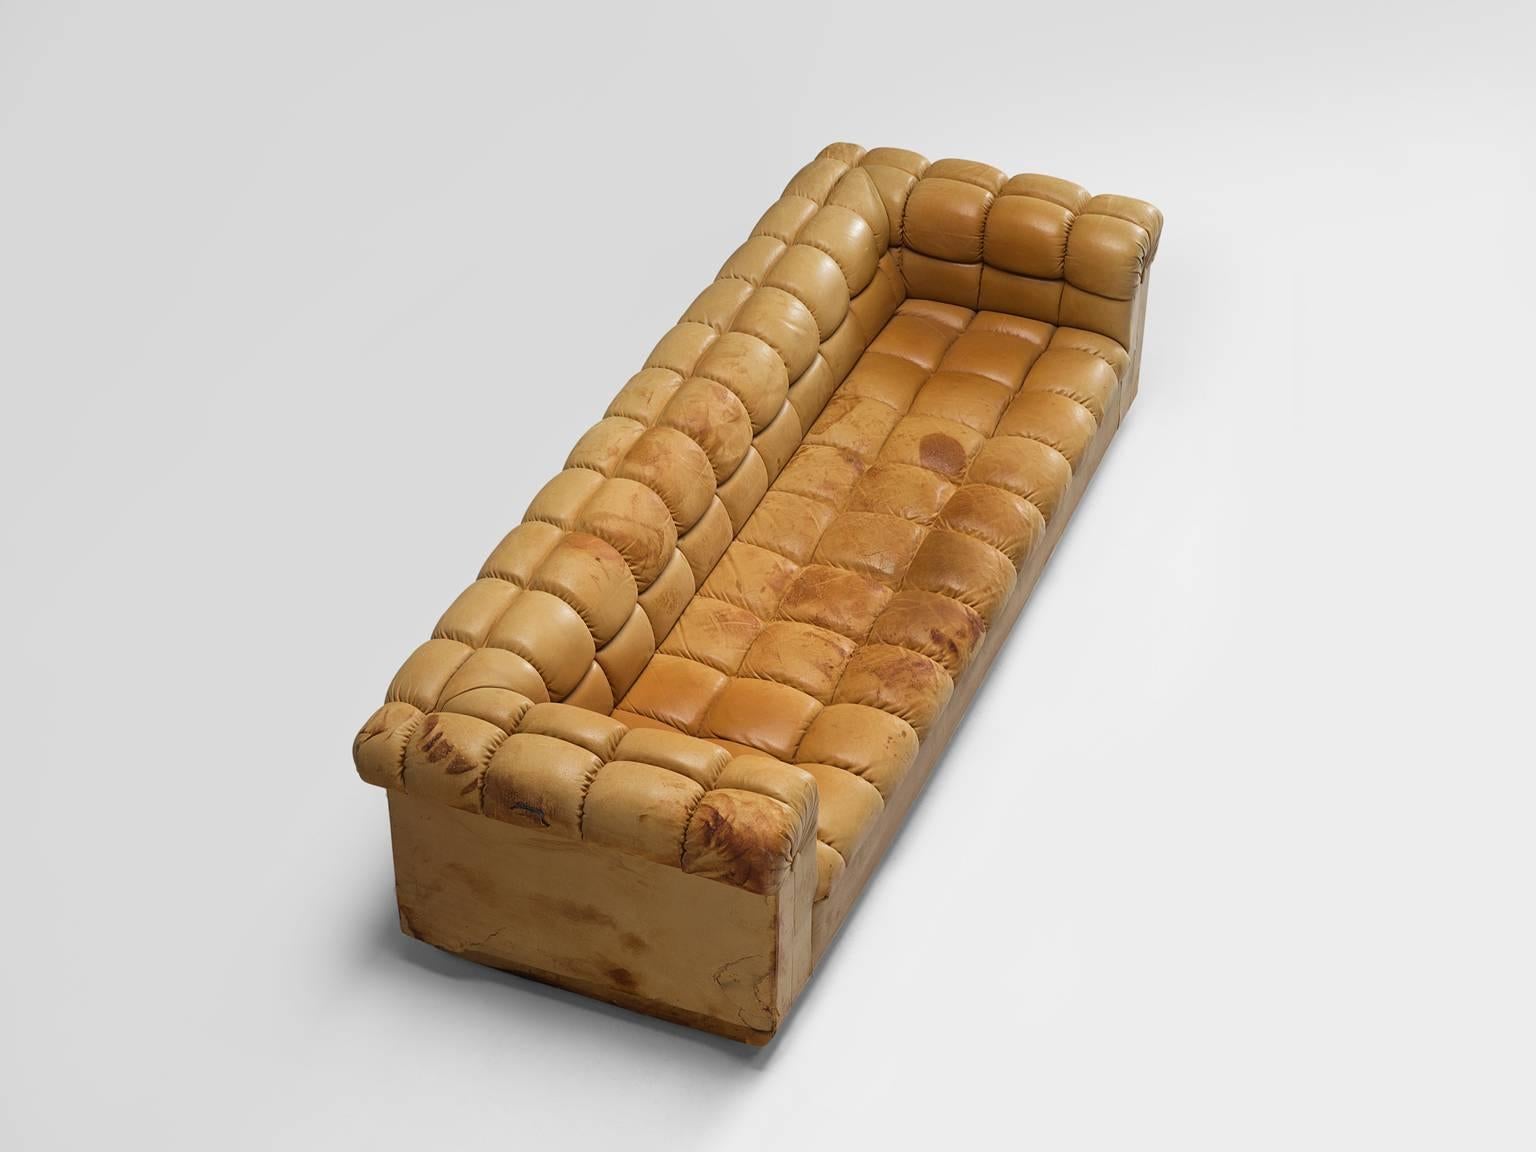 American Edward Wormley 'Party' Sofa in Cognac Leather